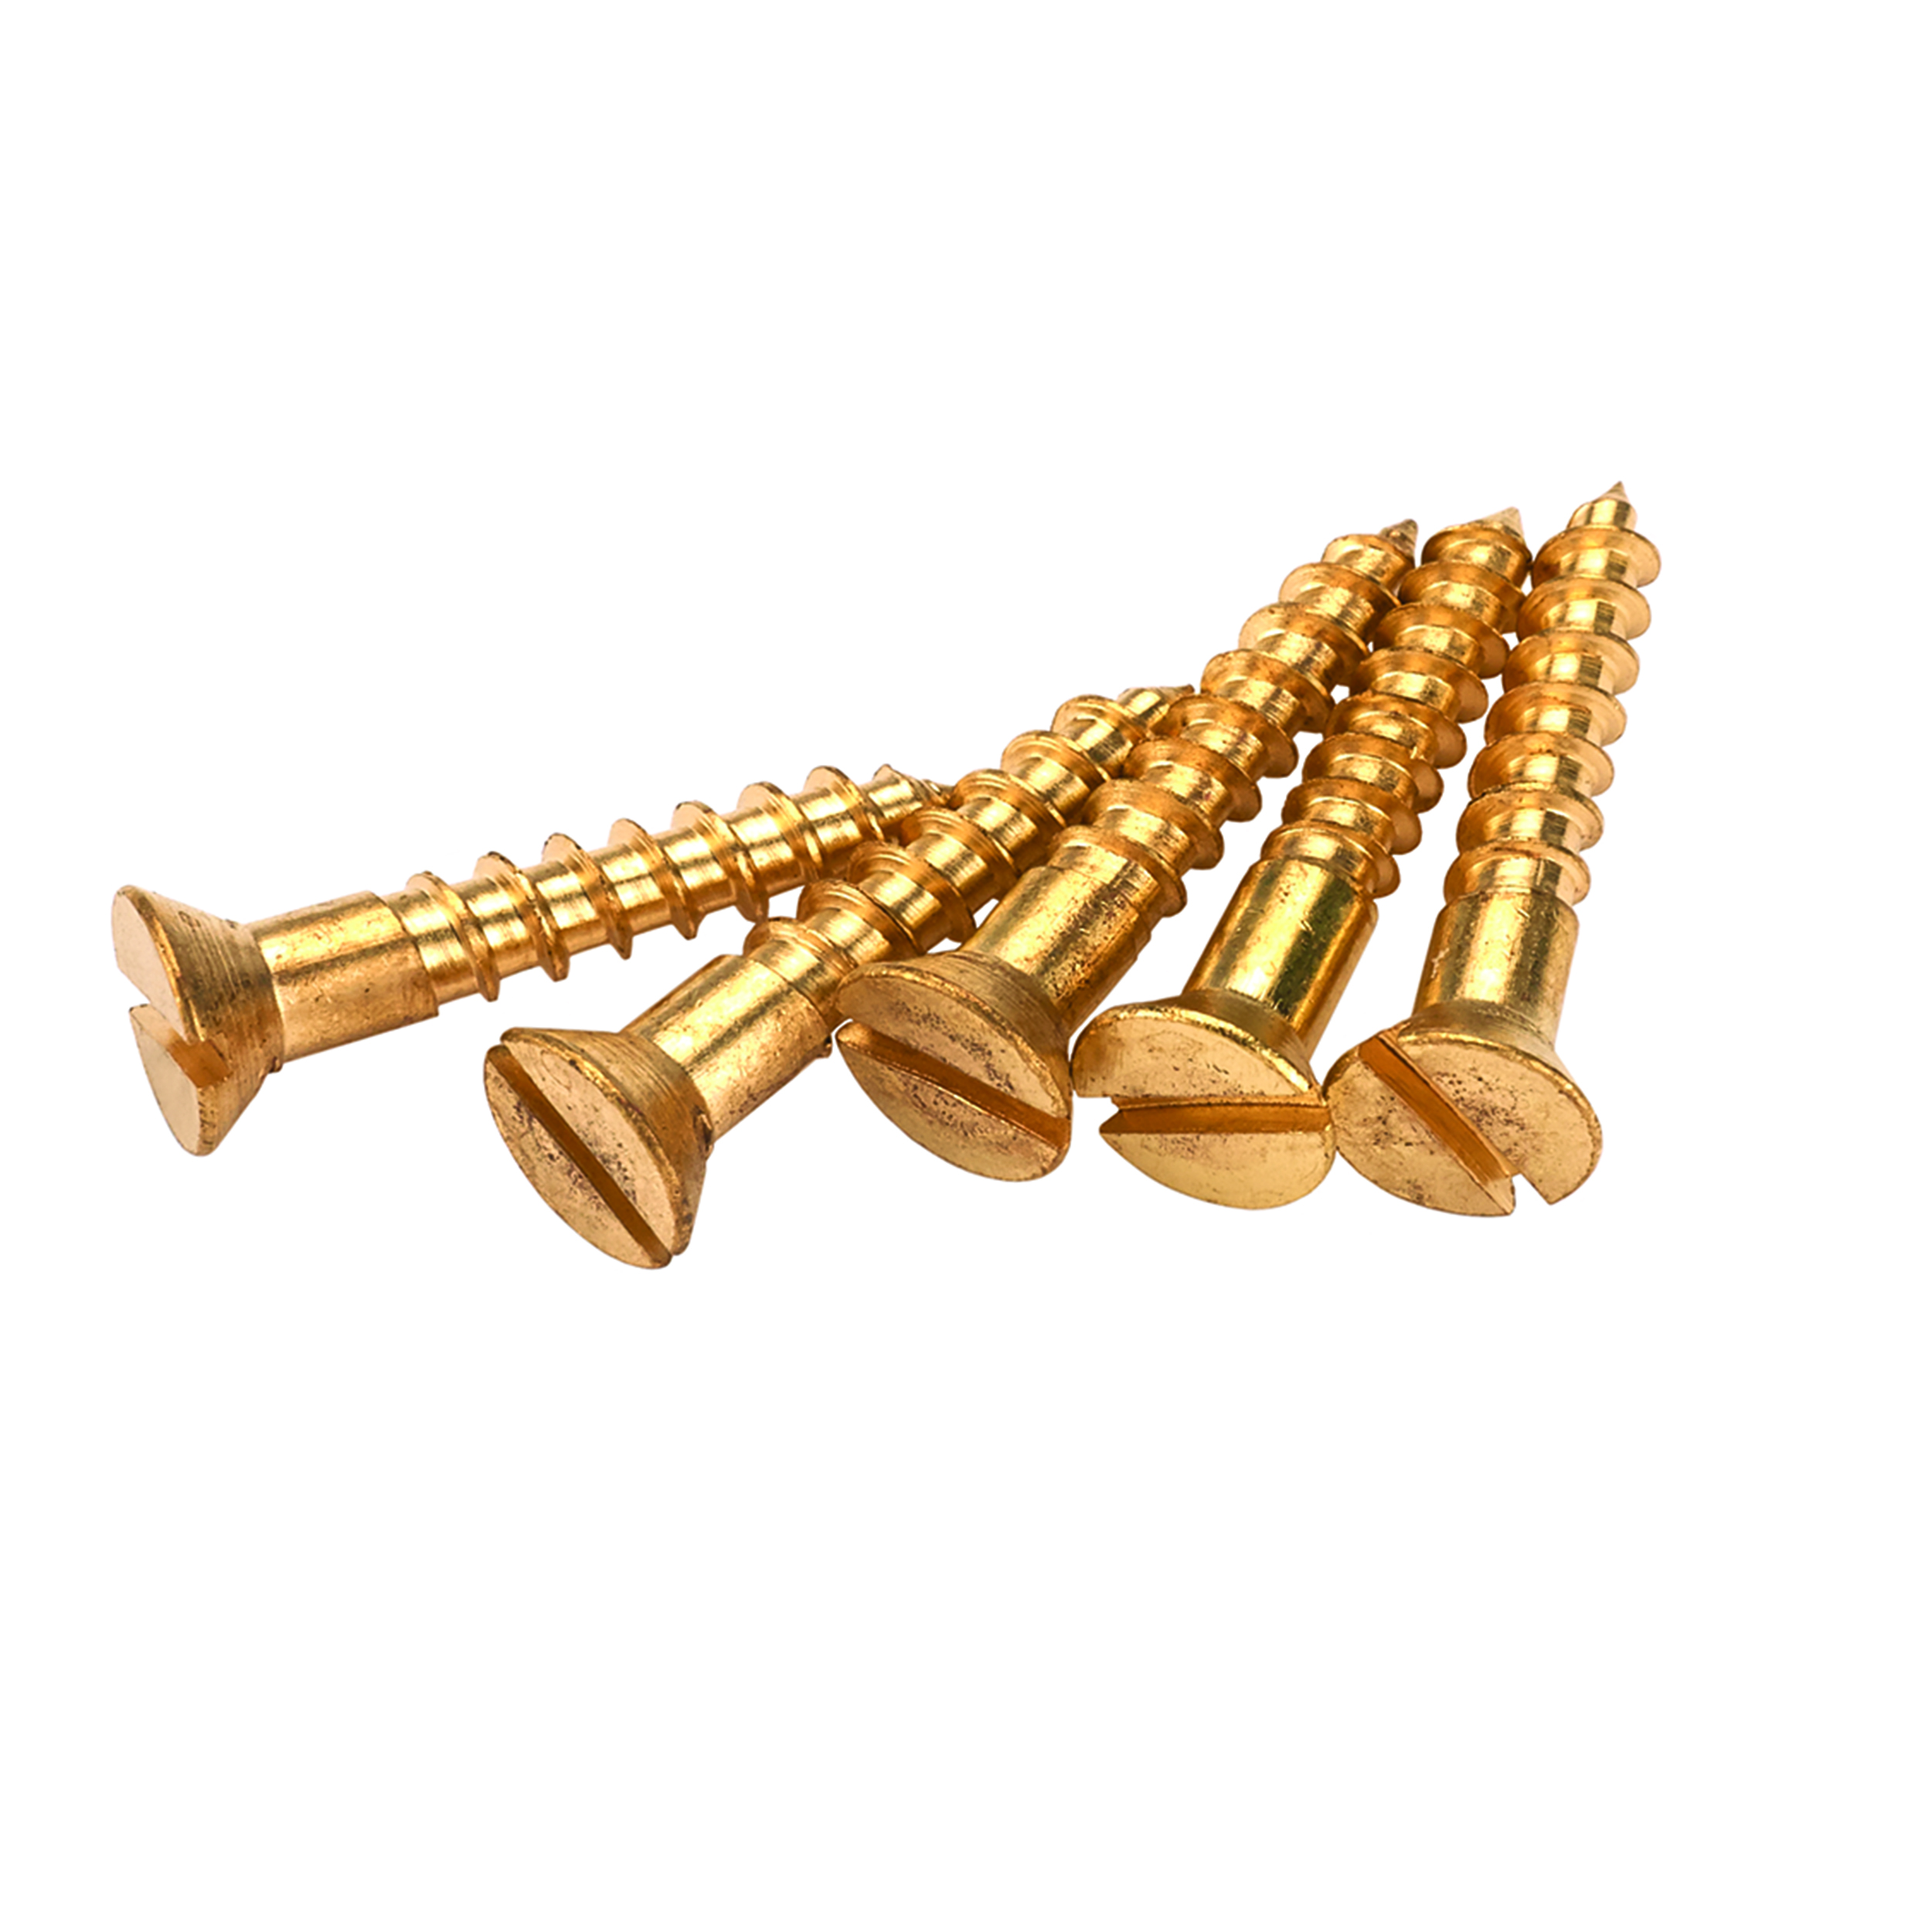 Solid Brass Screws #4 X5/8" Slotted 25-piece